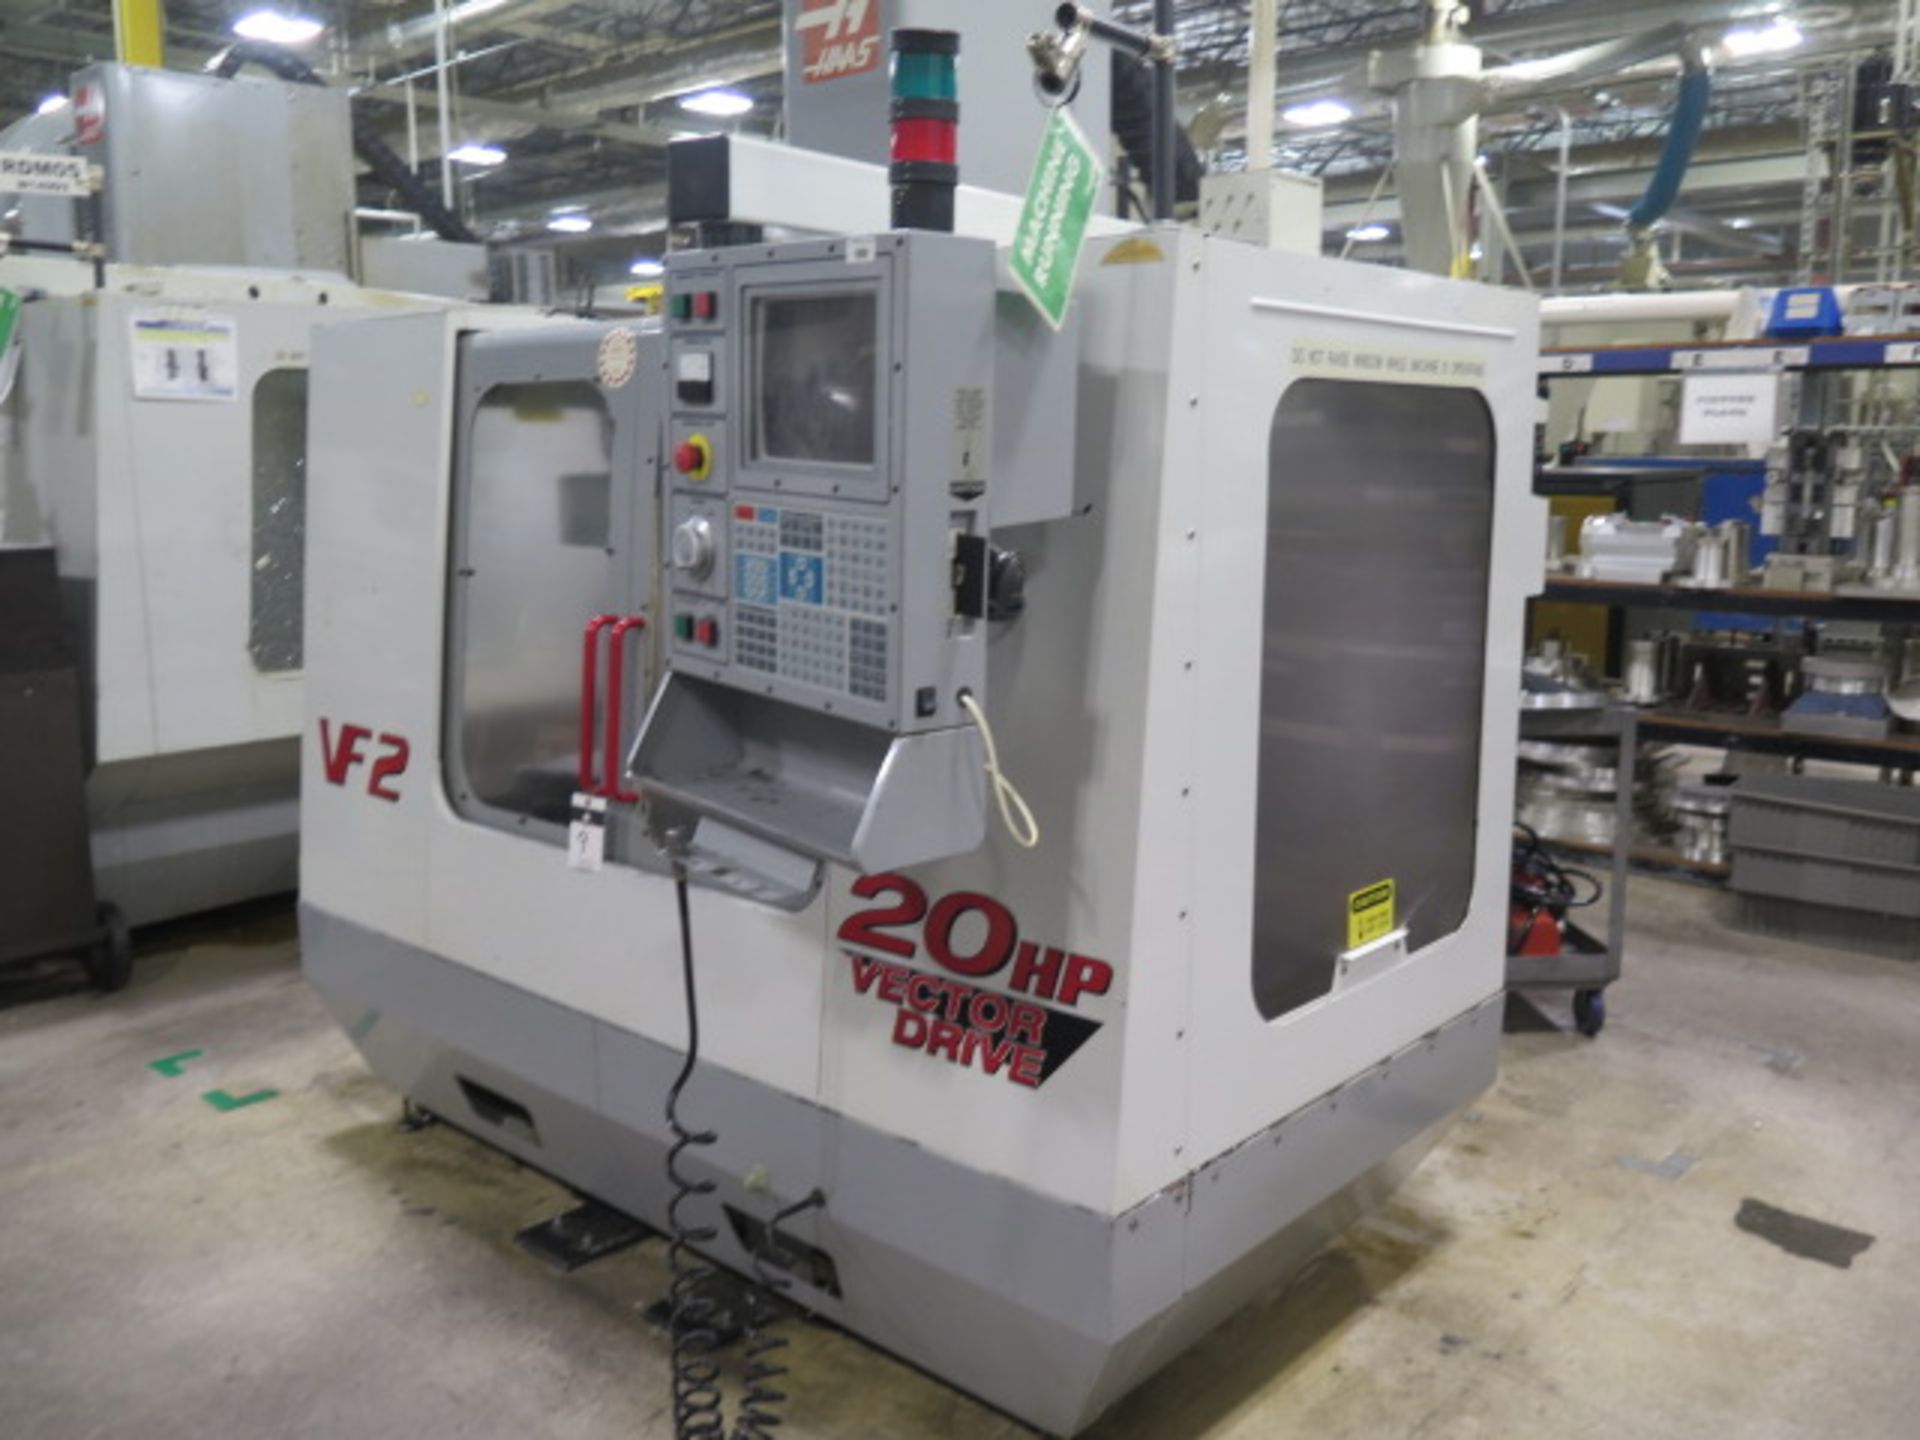 2000 Haas VF-2 4-Axis CNC Vertical Machining Center s/n 20390 w/ Haas Controls, 20-Station ATC, CAT - Image 2 of 18